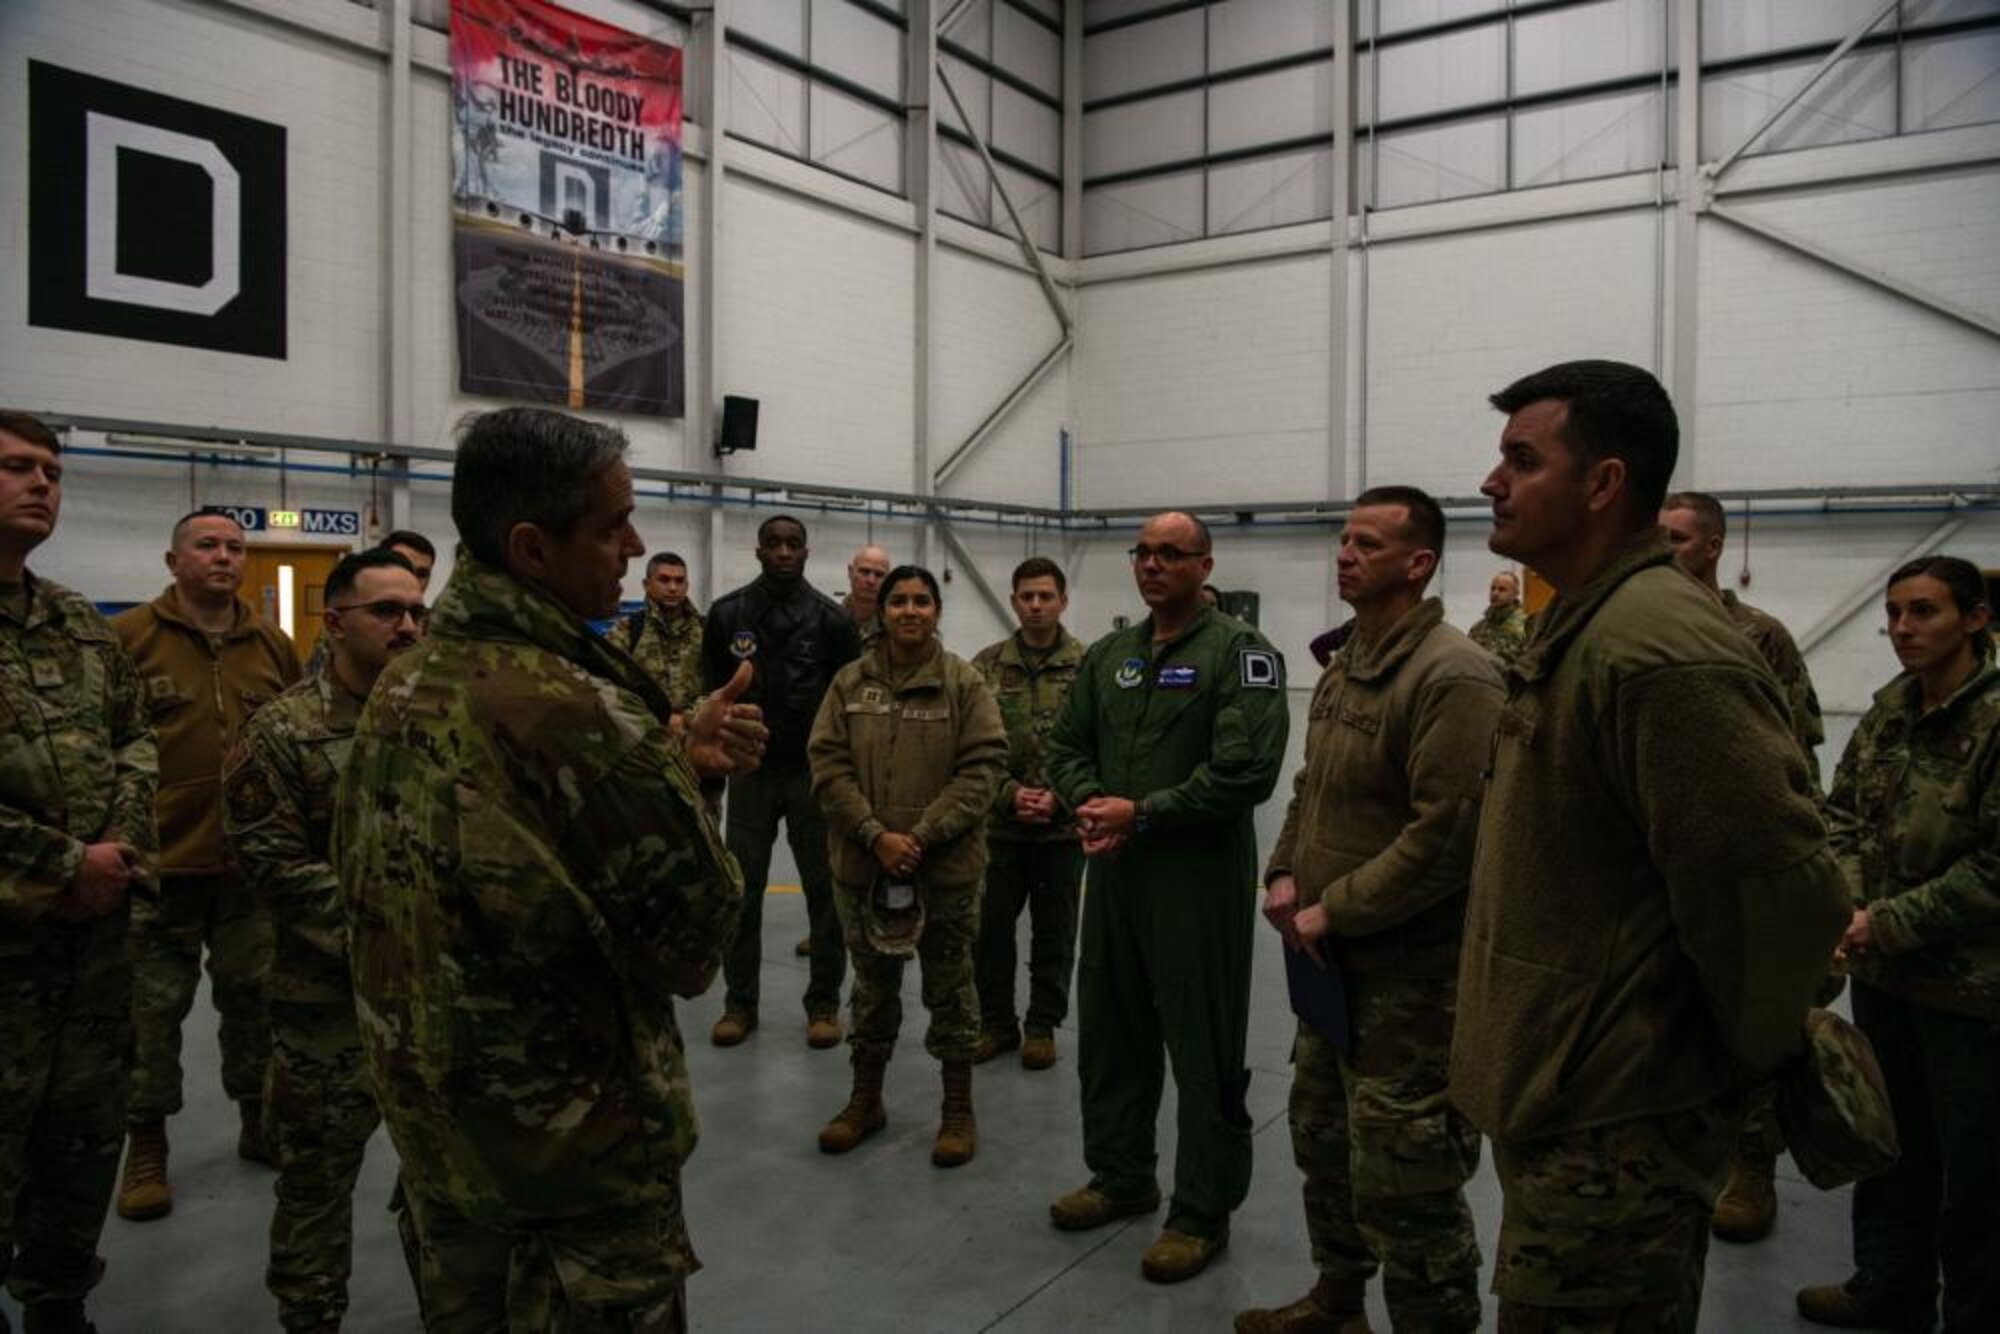 U.S. Air Force Lt. Gen. Steven Basham, U.S. Air Forces in Europe and Air Forces Africa deputy commander, discusses with a group of maintenance Airmen about the capabilities of a KC-135 Stratotanker aircraft at Royal Air Force Mildenhall, England, Nov. 3, 2021. Basham’s visit during exercise Castle Forge allowed him to see how the 100th ARW is implementing future Air Force Warfighting concepts into its training and operations. (U.S. Air Force photo by Senior Airman Nicholas Swift)